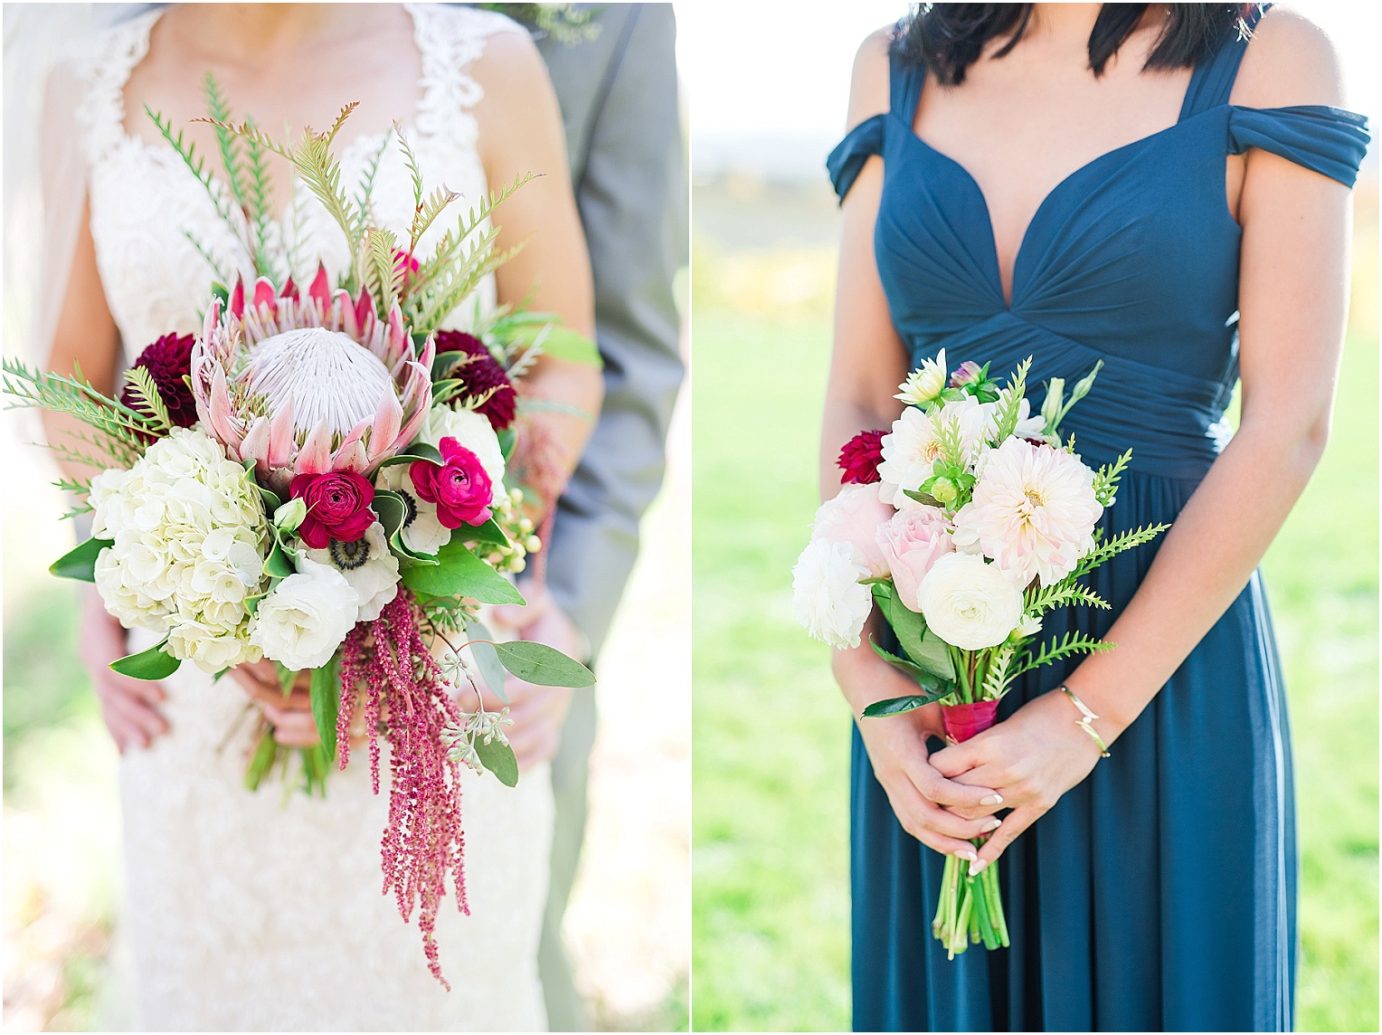 Best Wedding Bouquets of 2016 Red and blush wedding bouquets with Protea